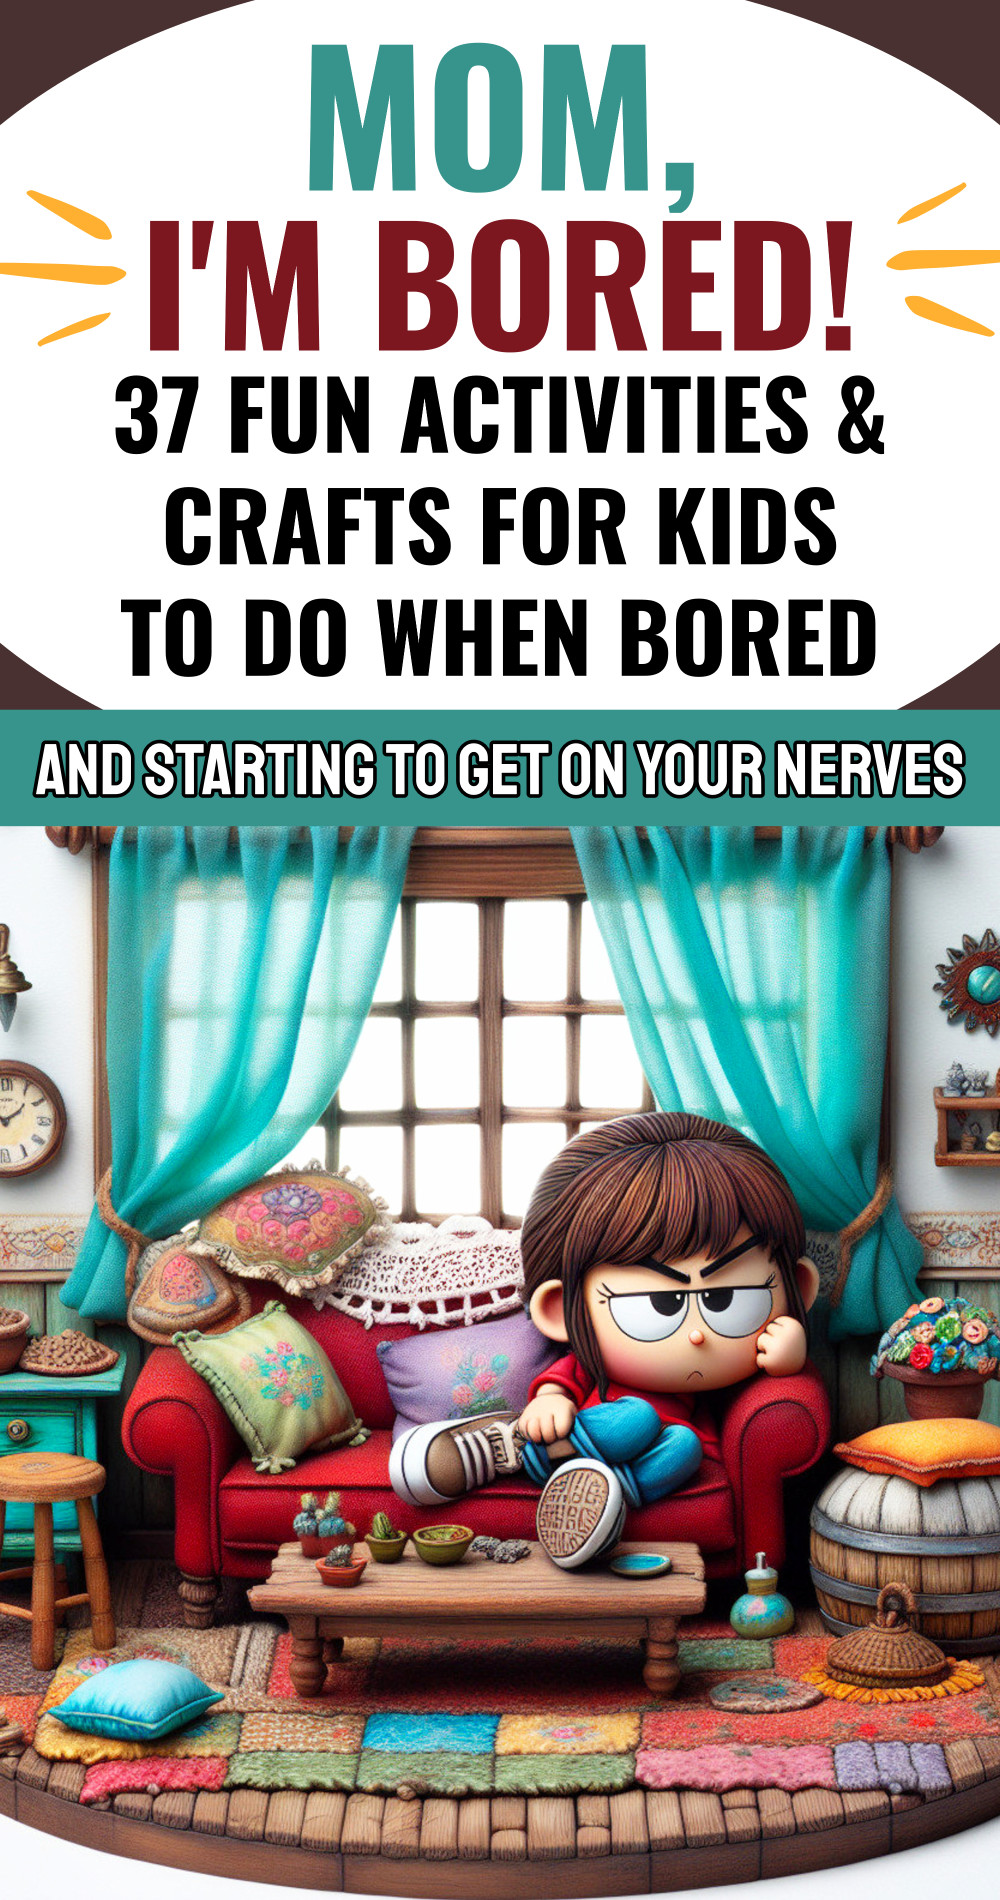 37 fun activities and crafts for kids to do when bored